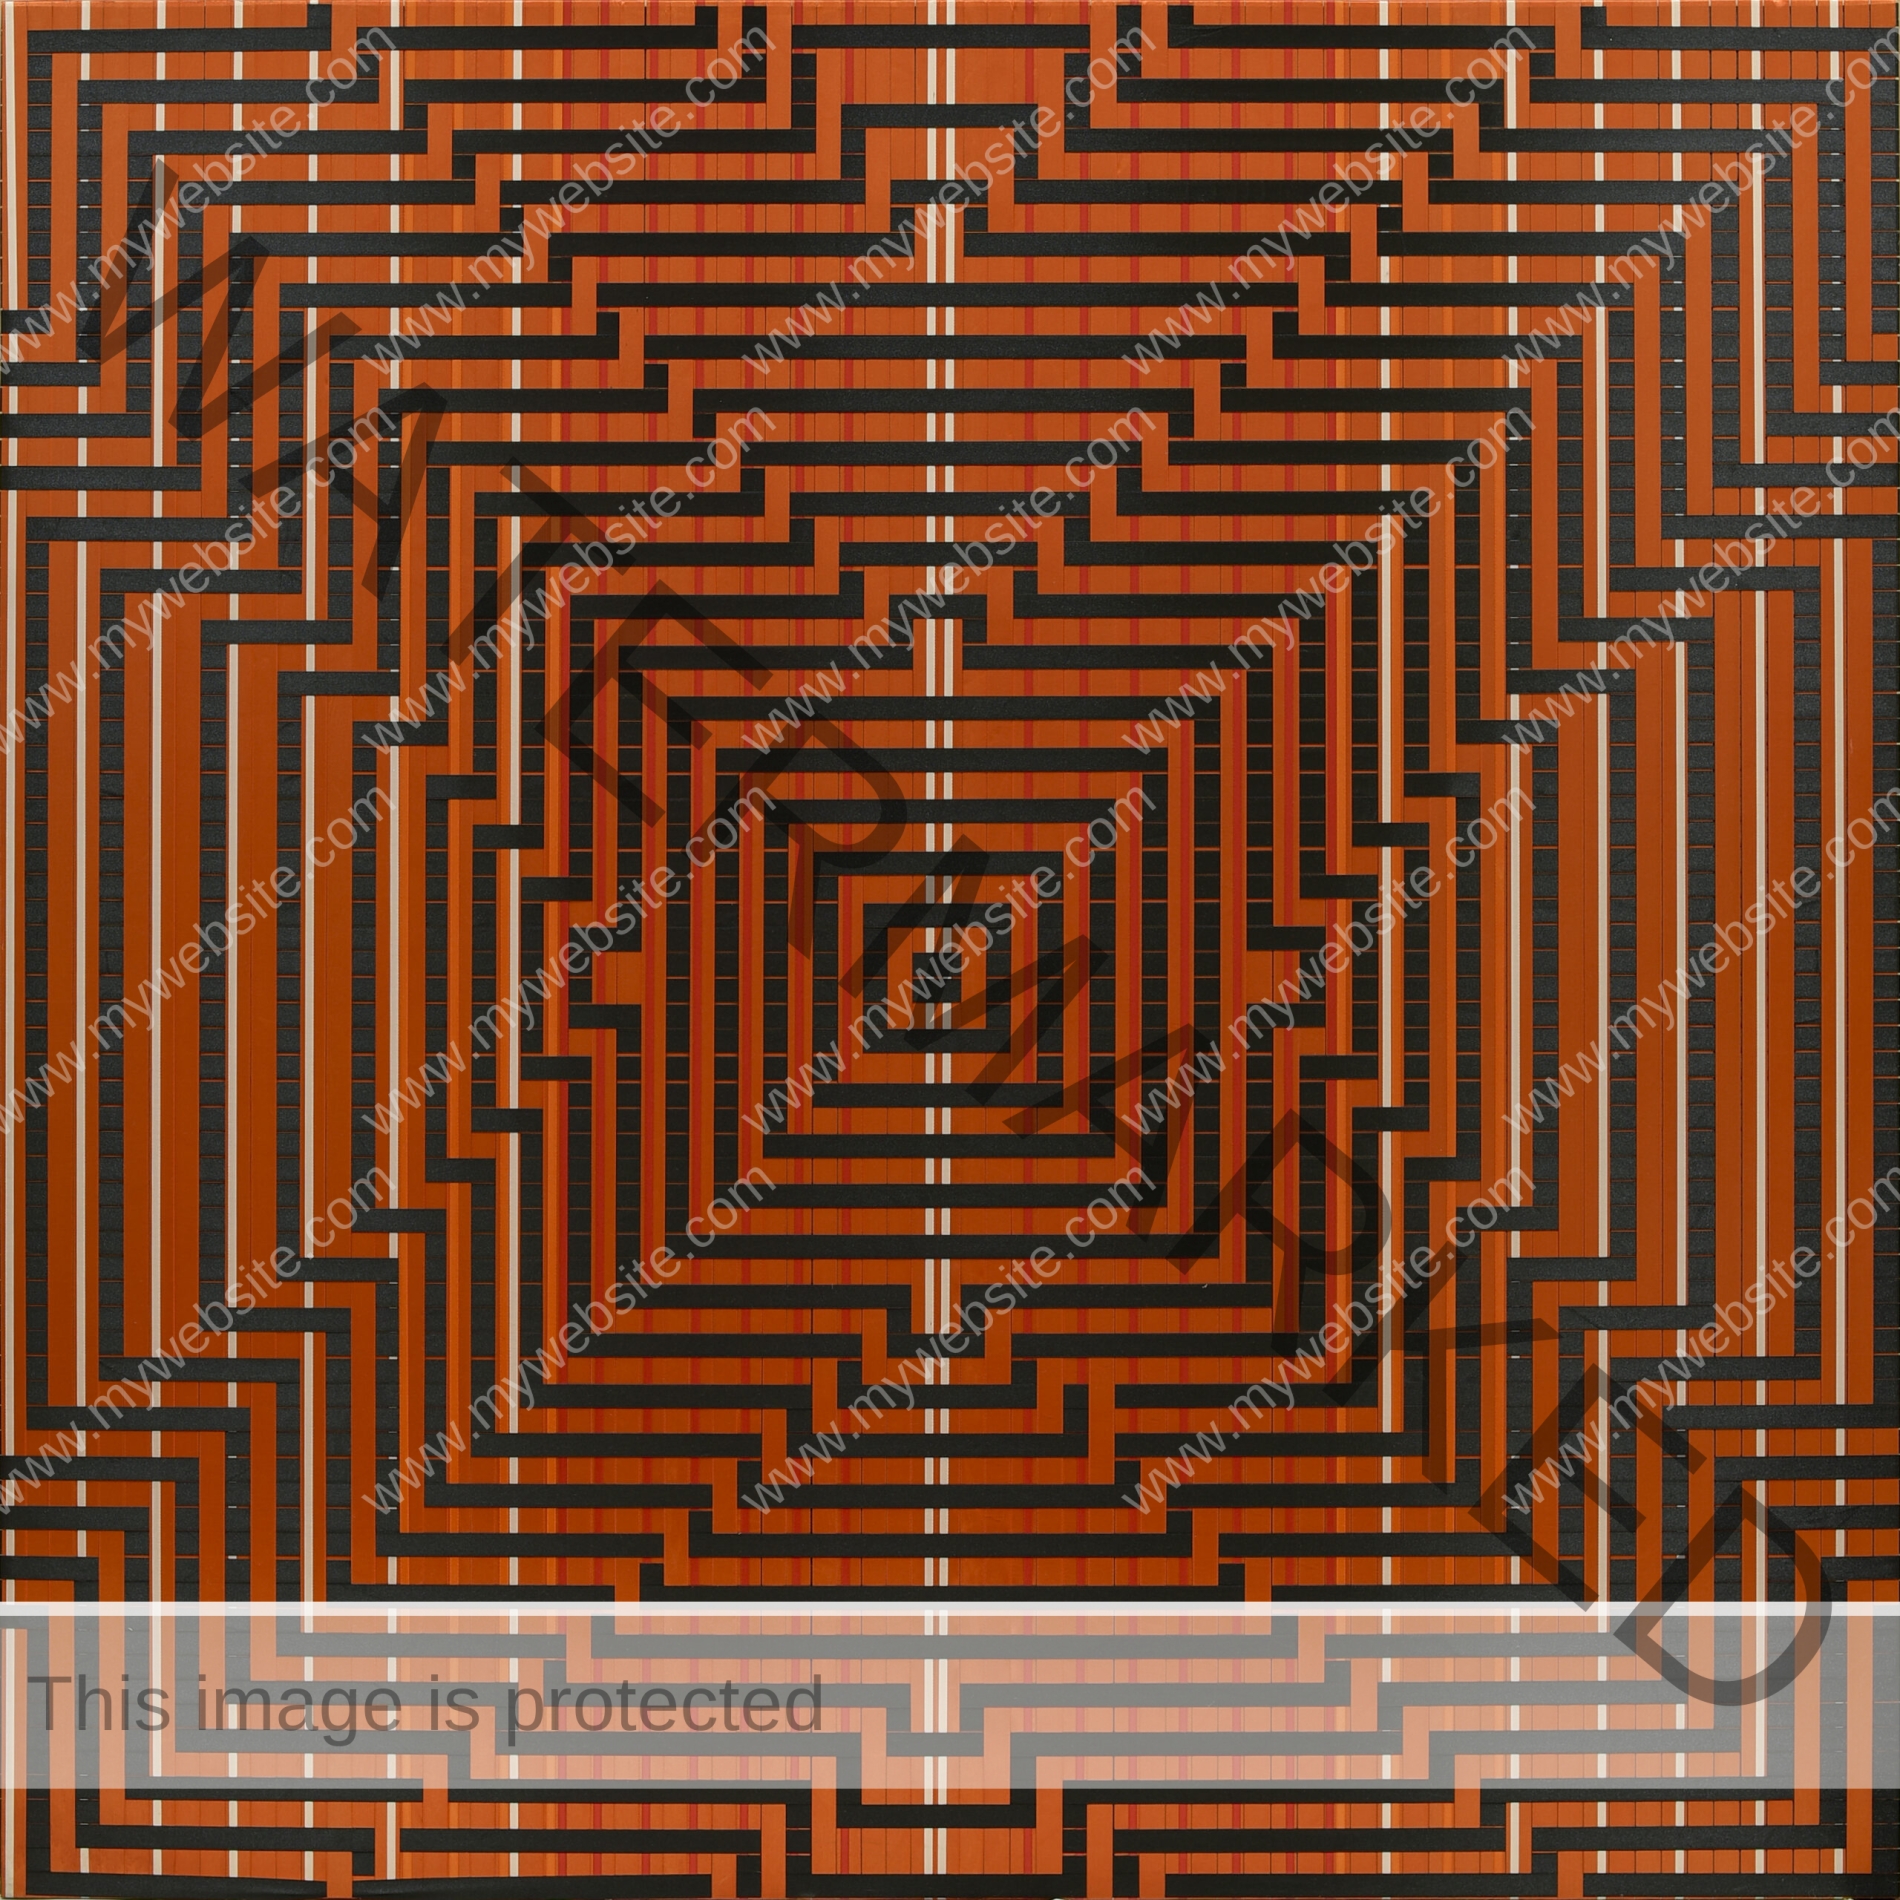 Kartin Aason woven ribbon art is a geometric masterpeice drawing in your eyes to the orange and black center